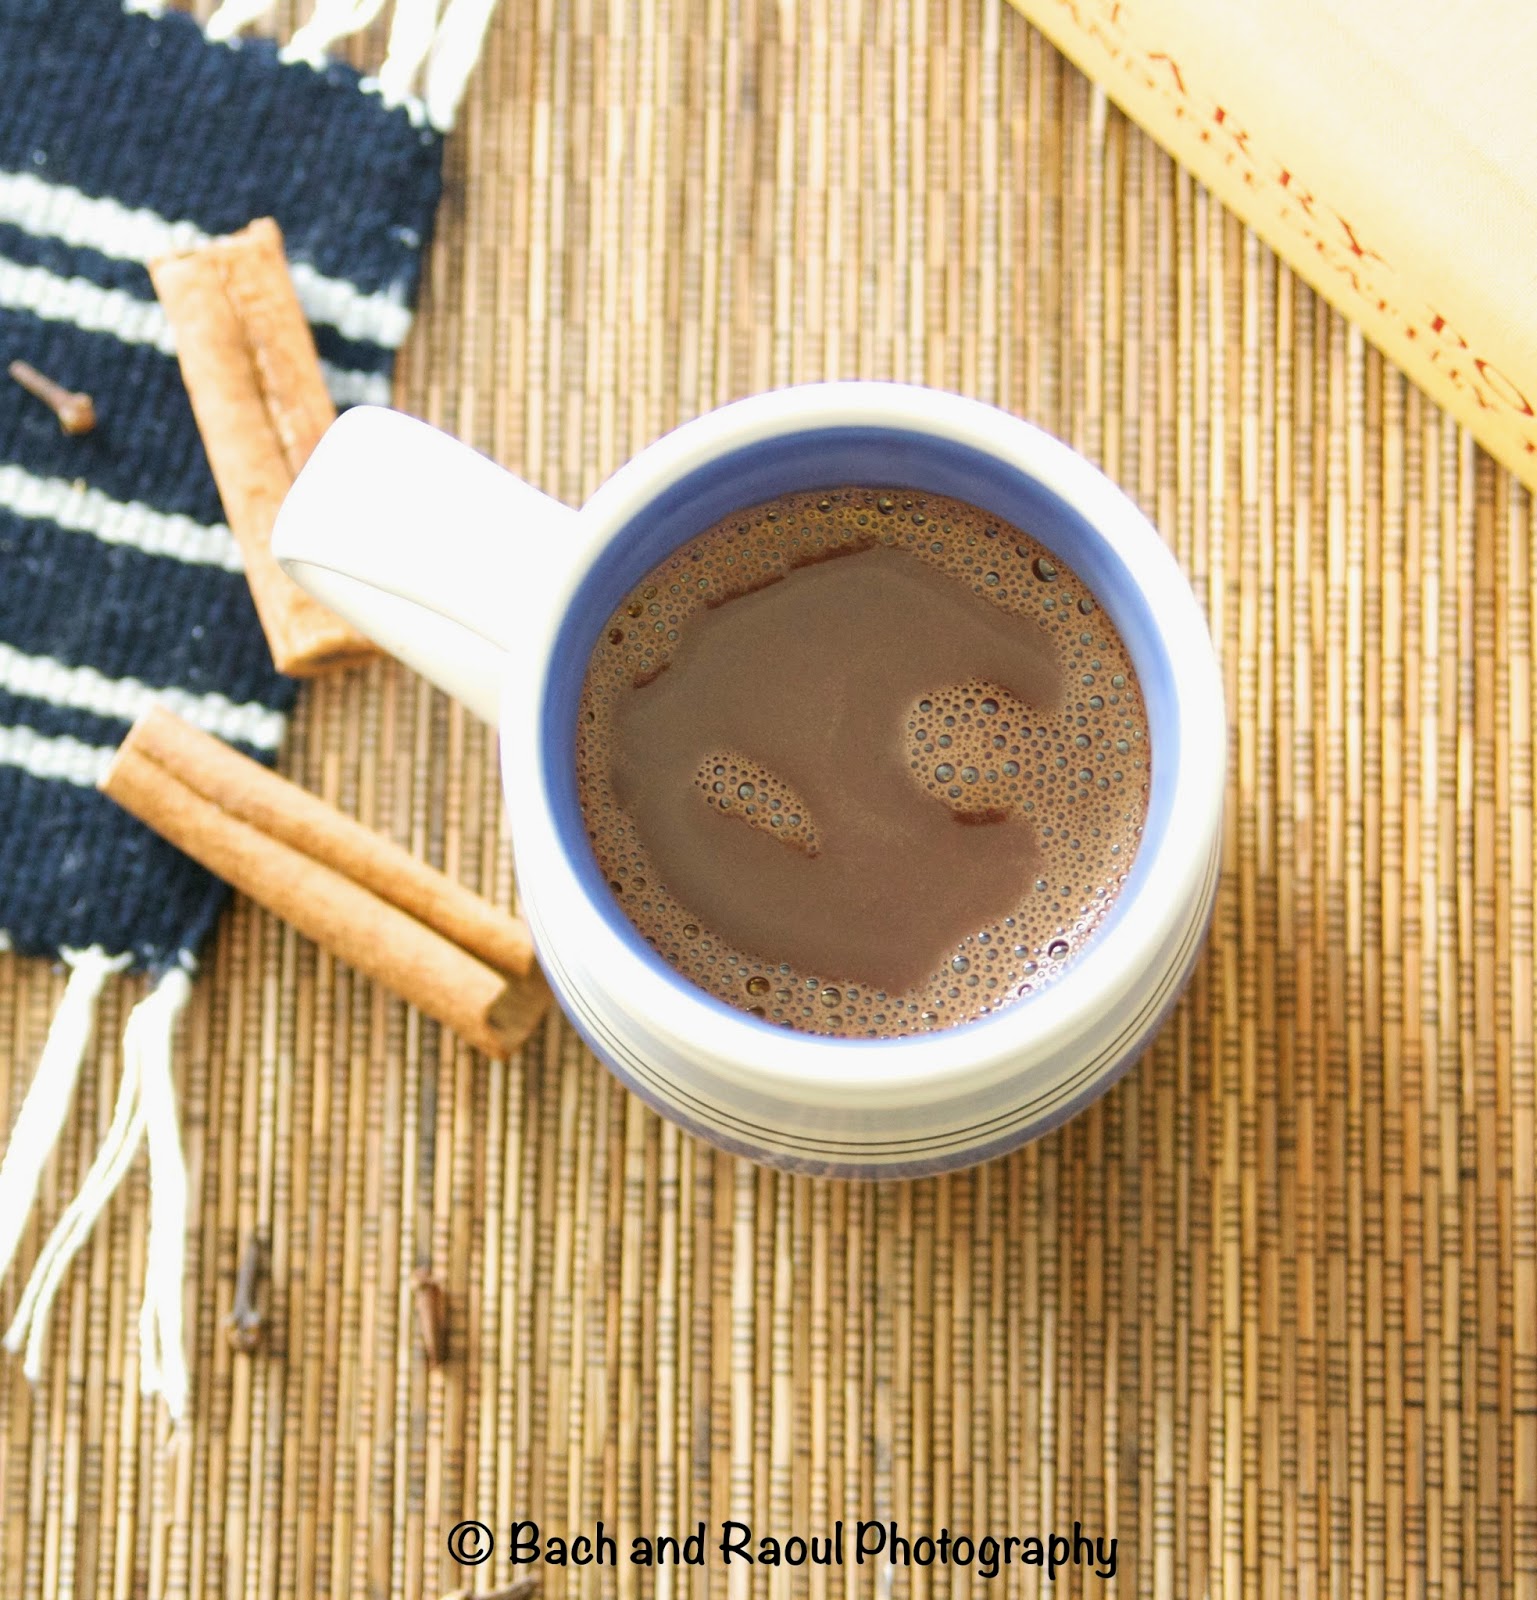 Bolivian Spiced Hot Chocolate - Rich, dark and decadent